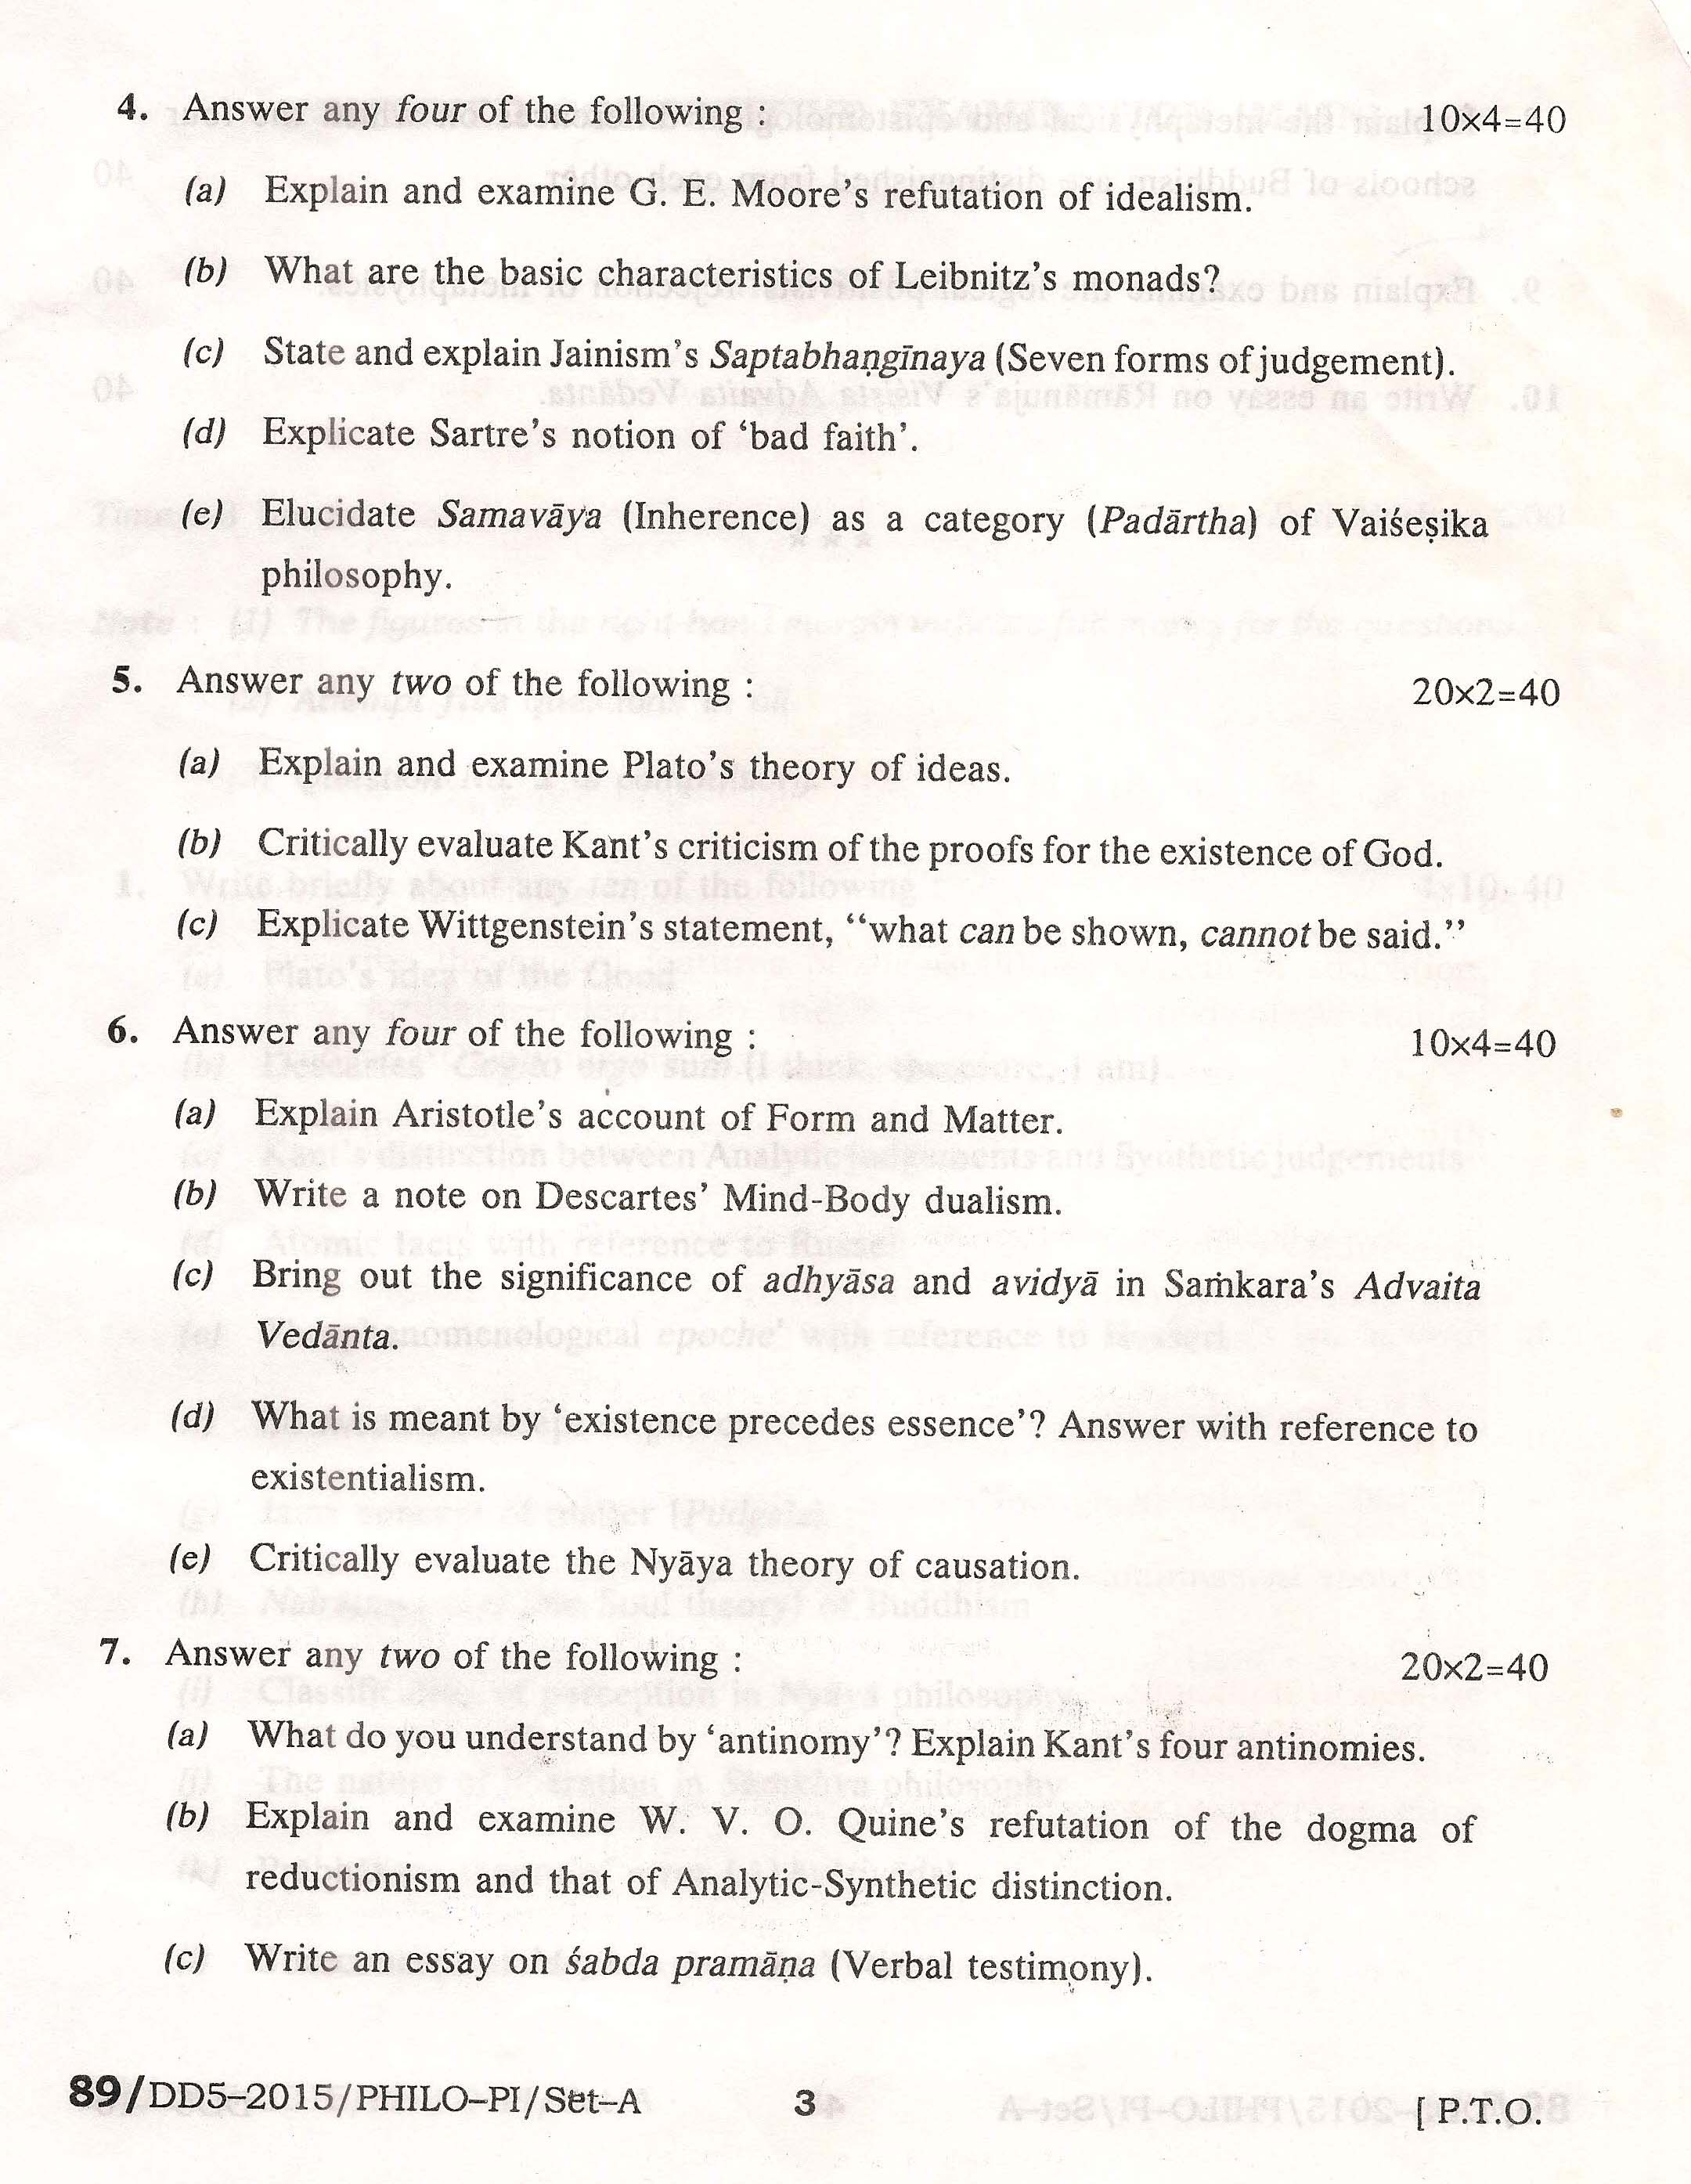 APPSC Combined Competitive Main Exam 2015 Philosophy Paper I 3